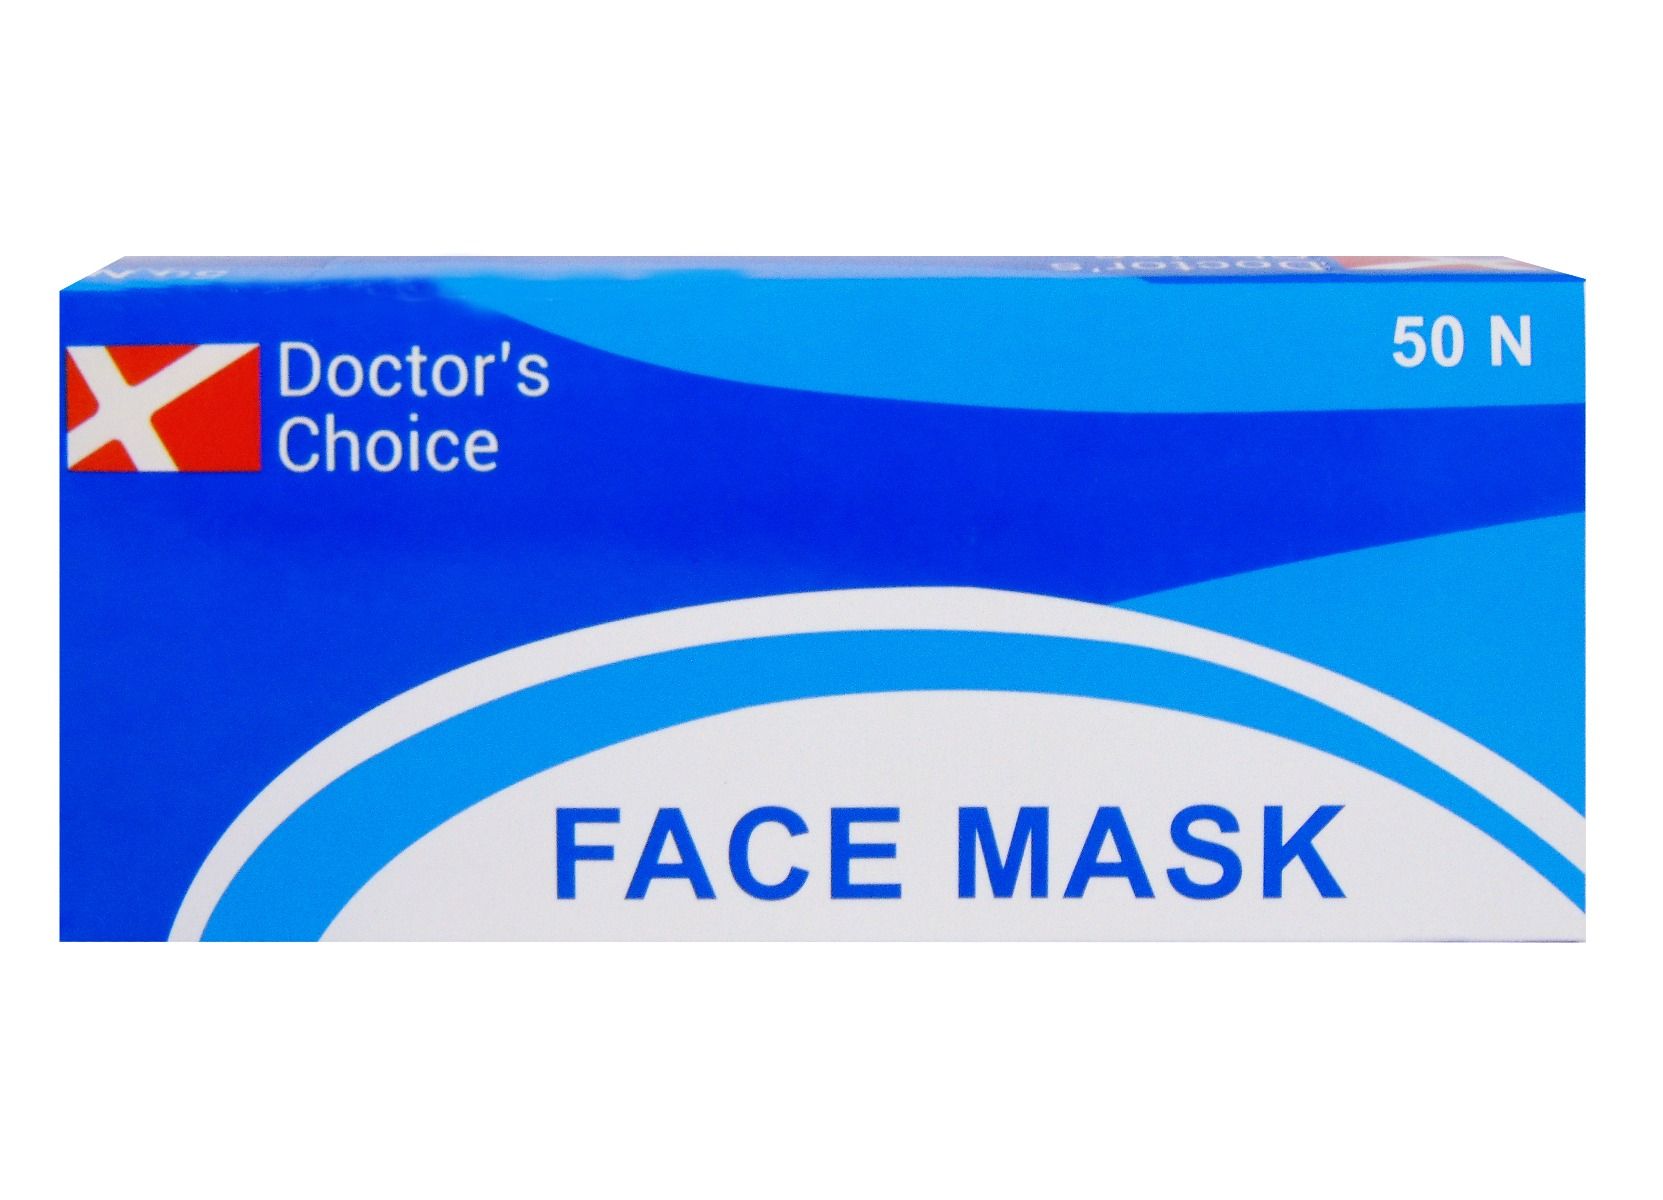 Doctor's Choice 3 Layer Loop Face Mask, 50 Count, Pack of 50 S